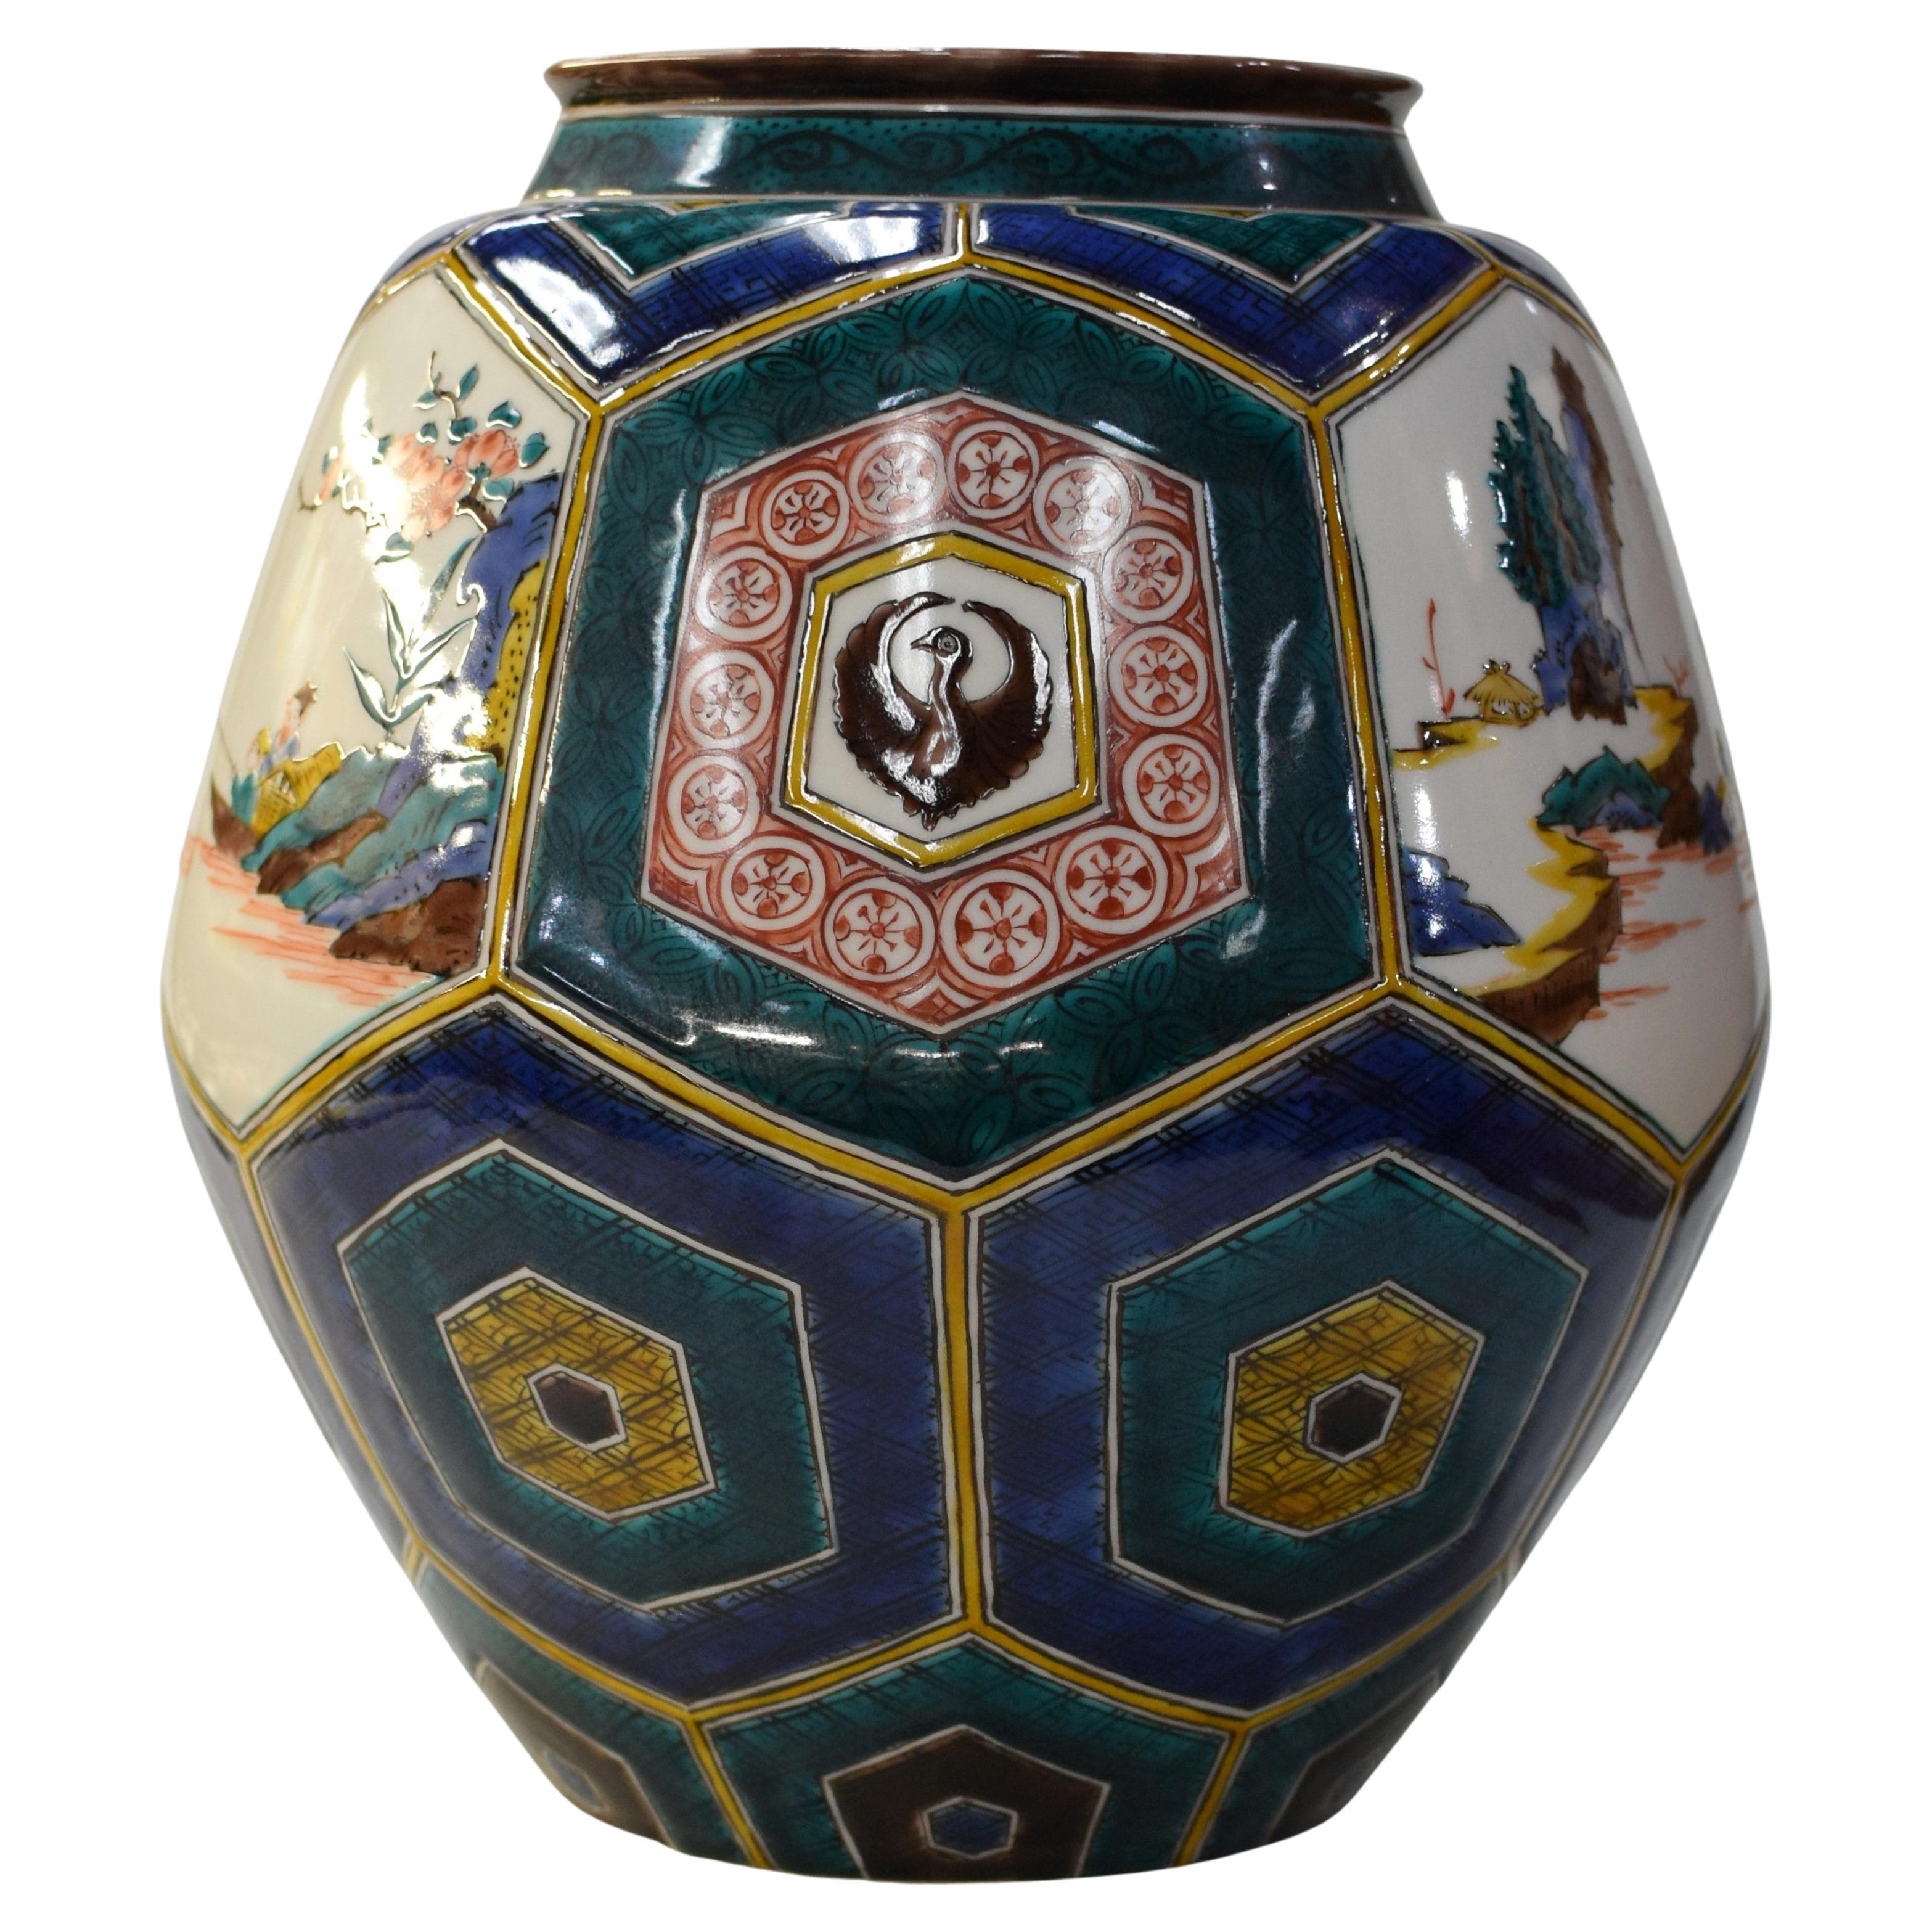 Exquisite Japanese contemporary Kutani decorative porcelain vase, hand painted in striking vivid Kutani traditional colors green, blue, yellow and red on a unique stunning shape, a signed masterpiece by the third generation master of a Kutani kiln